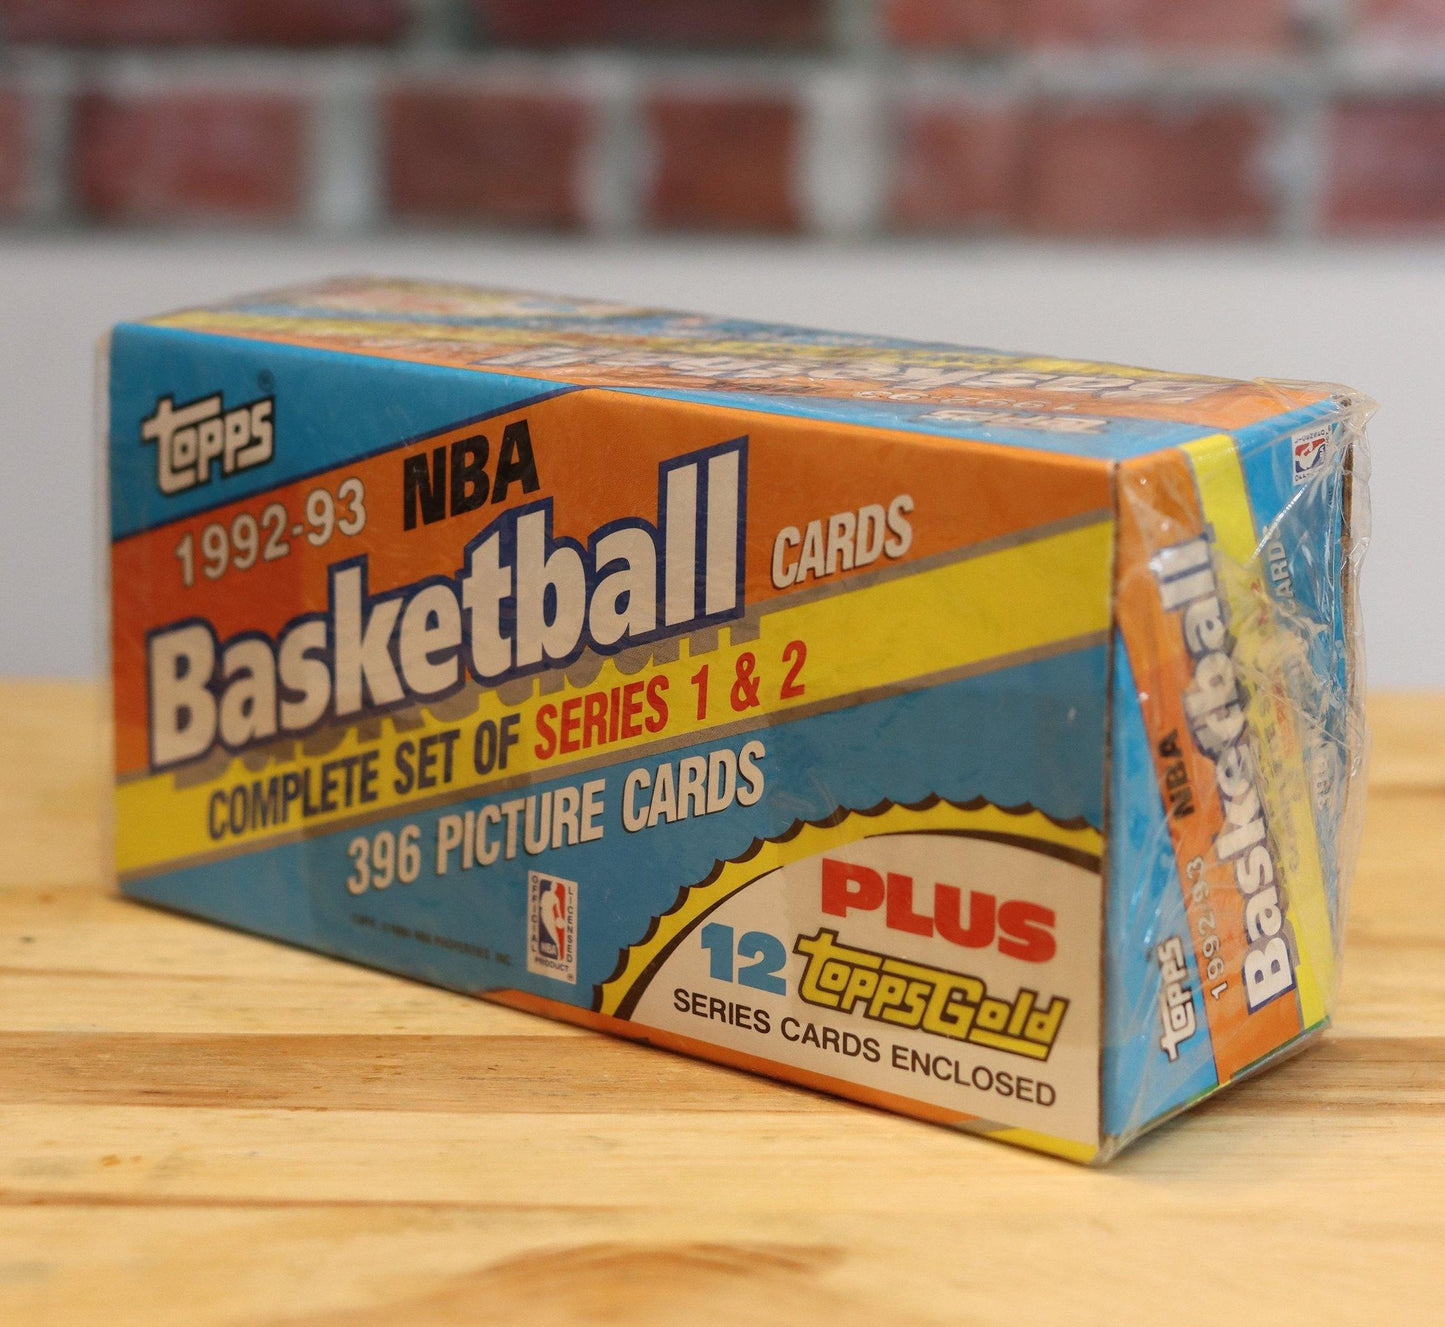 1992/93 Topps Basketball Complete Factory Set (396 Cards) - FLIP Collectibles Shop